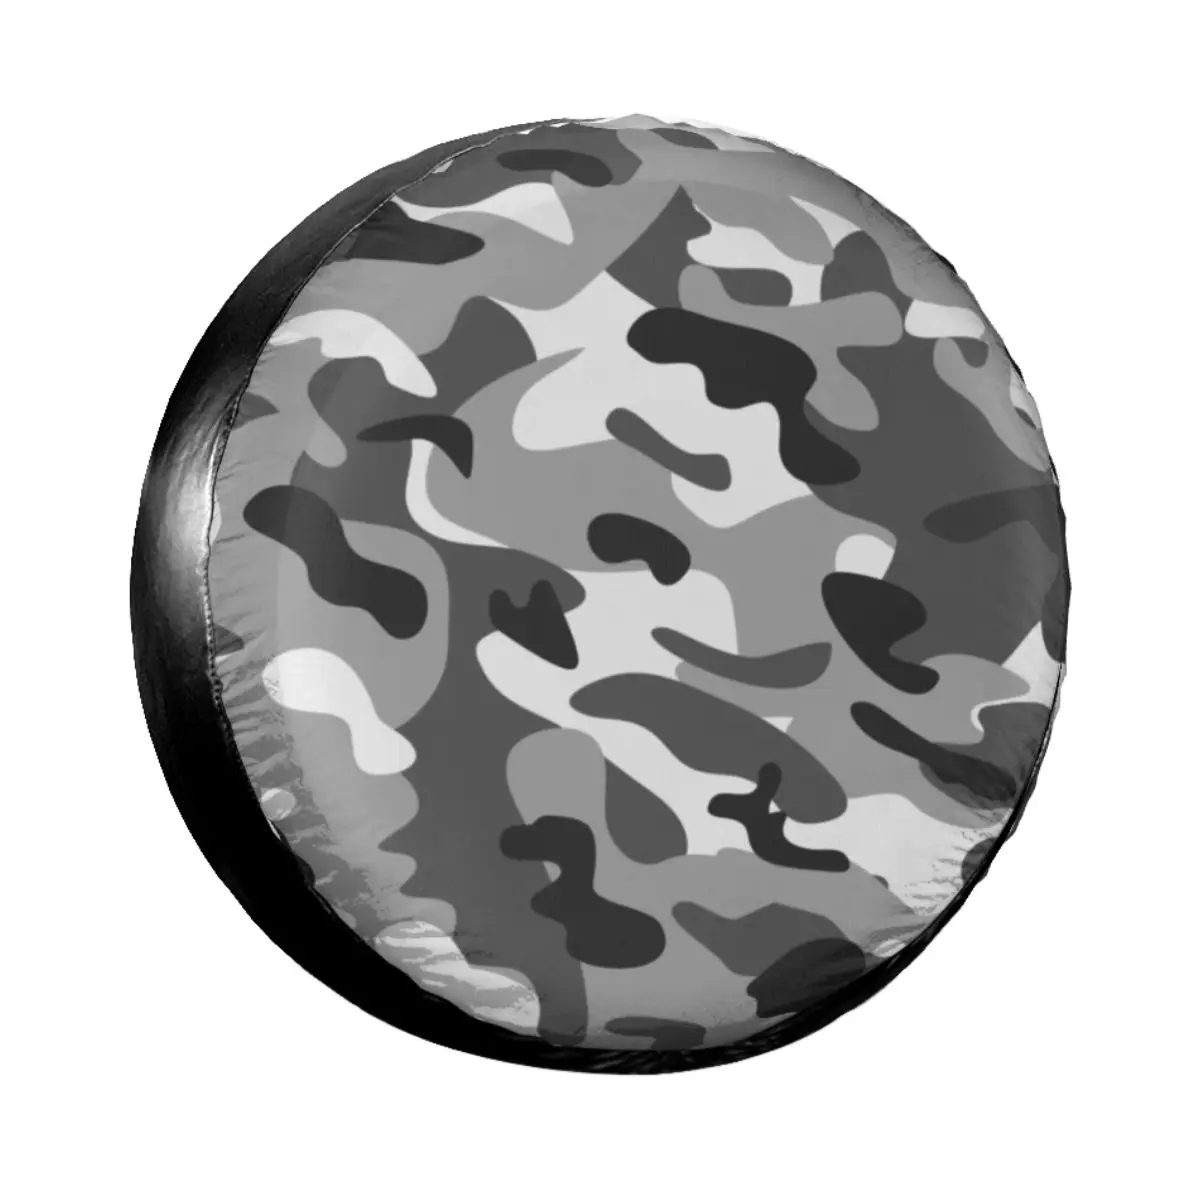 Custom Grey Camouflage Spare Tire Cover for Jeep Honda Military Army Camo Car Wheel Protectors 14" 15" 16" 17" Inch spare tire covers Car Covers